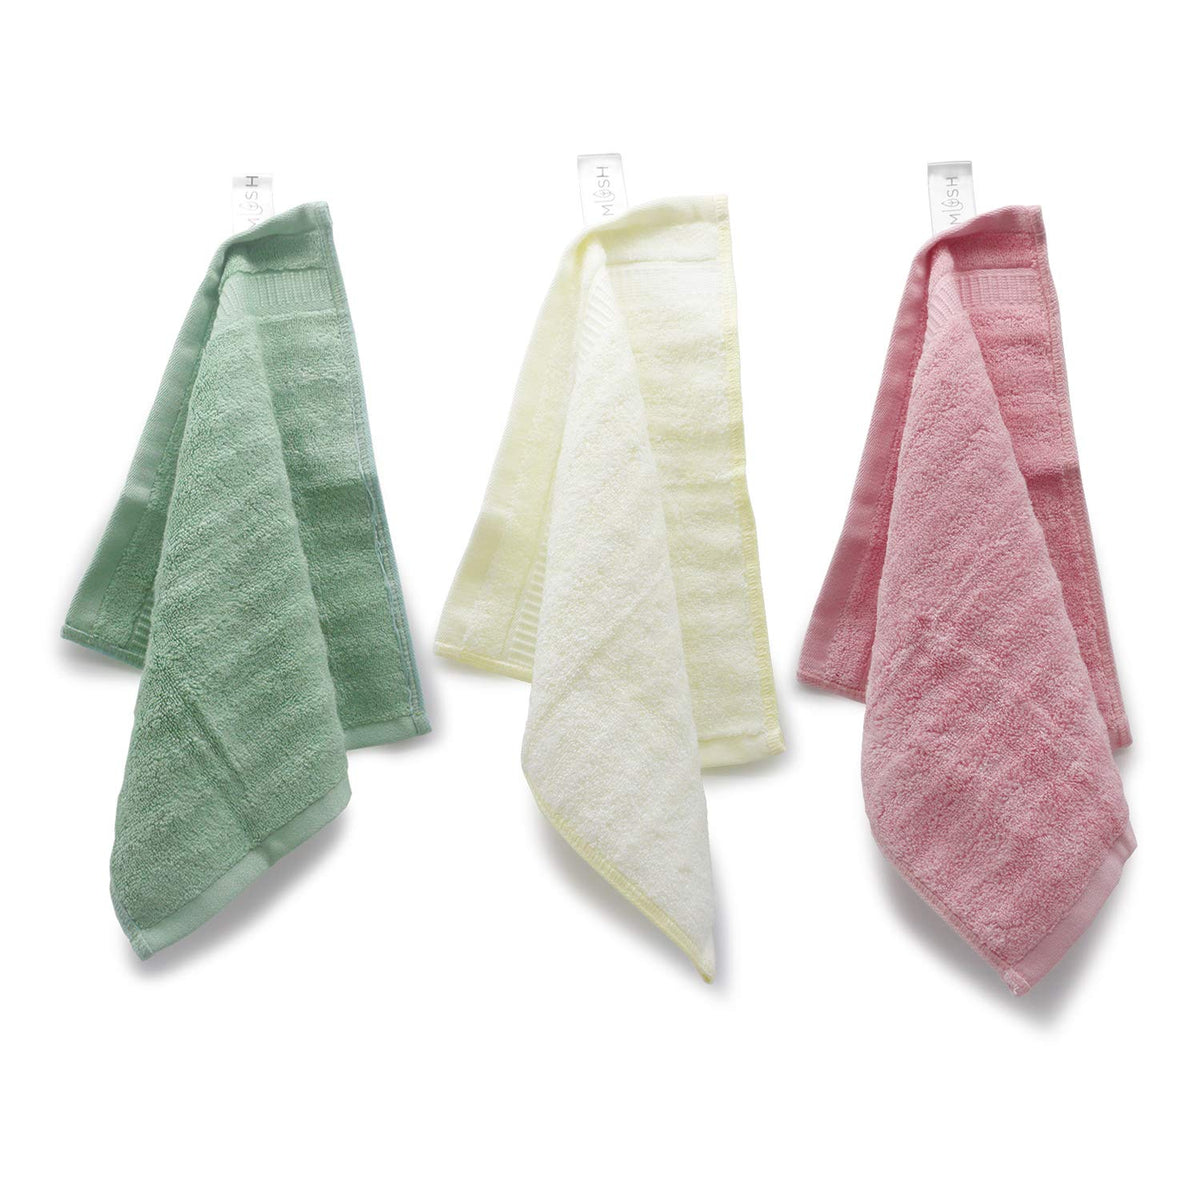 Mush Bamboo Face Towel Set of 3 - Cream, Pink & Green | 100% Bamboo |Ultra Soft, Absorbent & Quick Dry Towel for facewash, Gym, Pool, Travel, Spa, Beauty Salon  and Yoga | 14 x 14 Inches 500 GSM